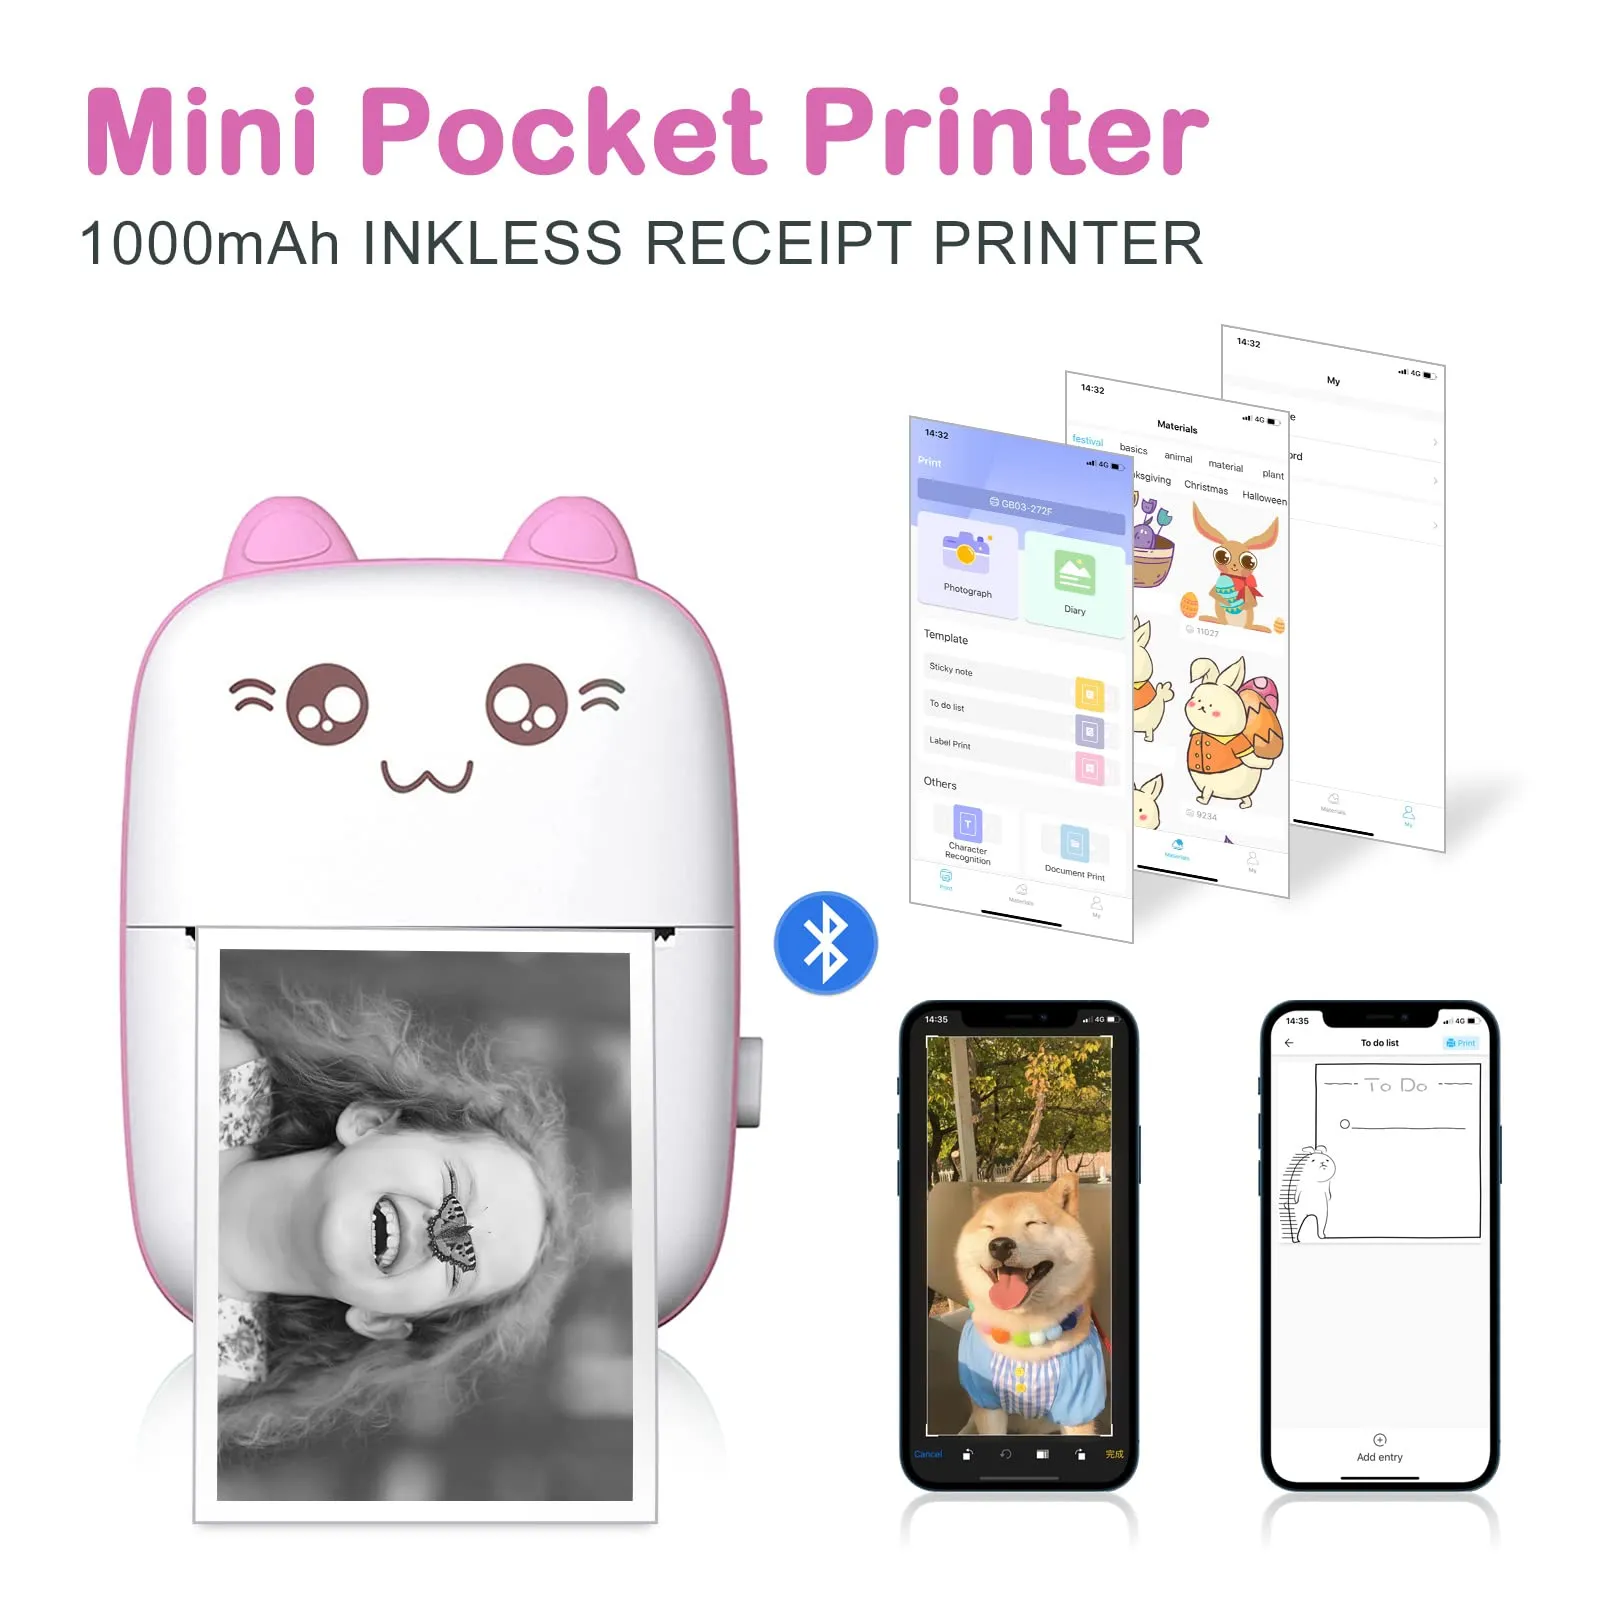 Mini Printer Portable, Pocket Thermal Printer, Bluetooth Wireless Smart Printer for Photo Picture Office Receipt Label Note QR Code Inkless Printing with APP